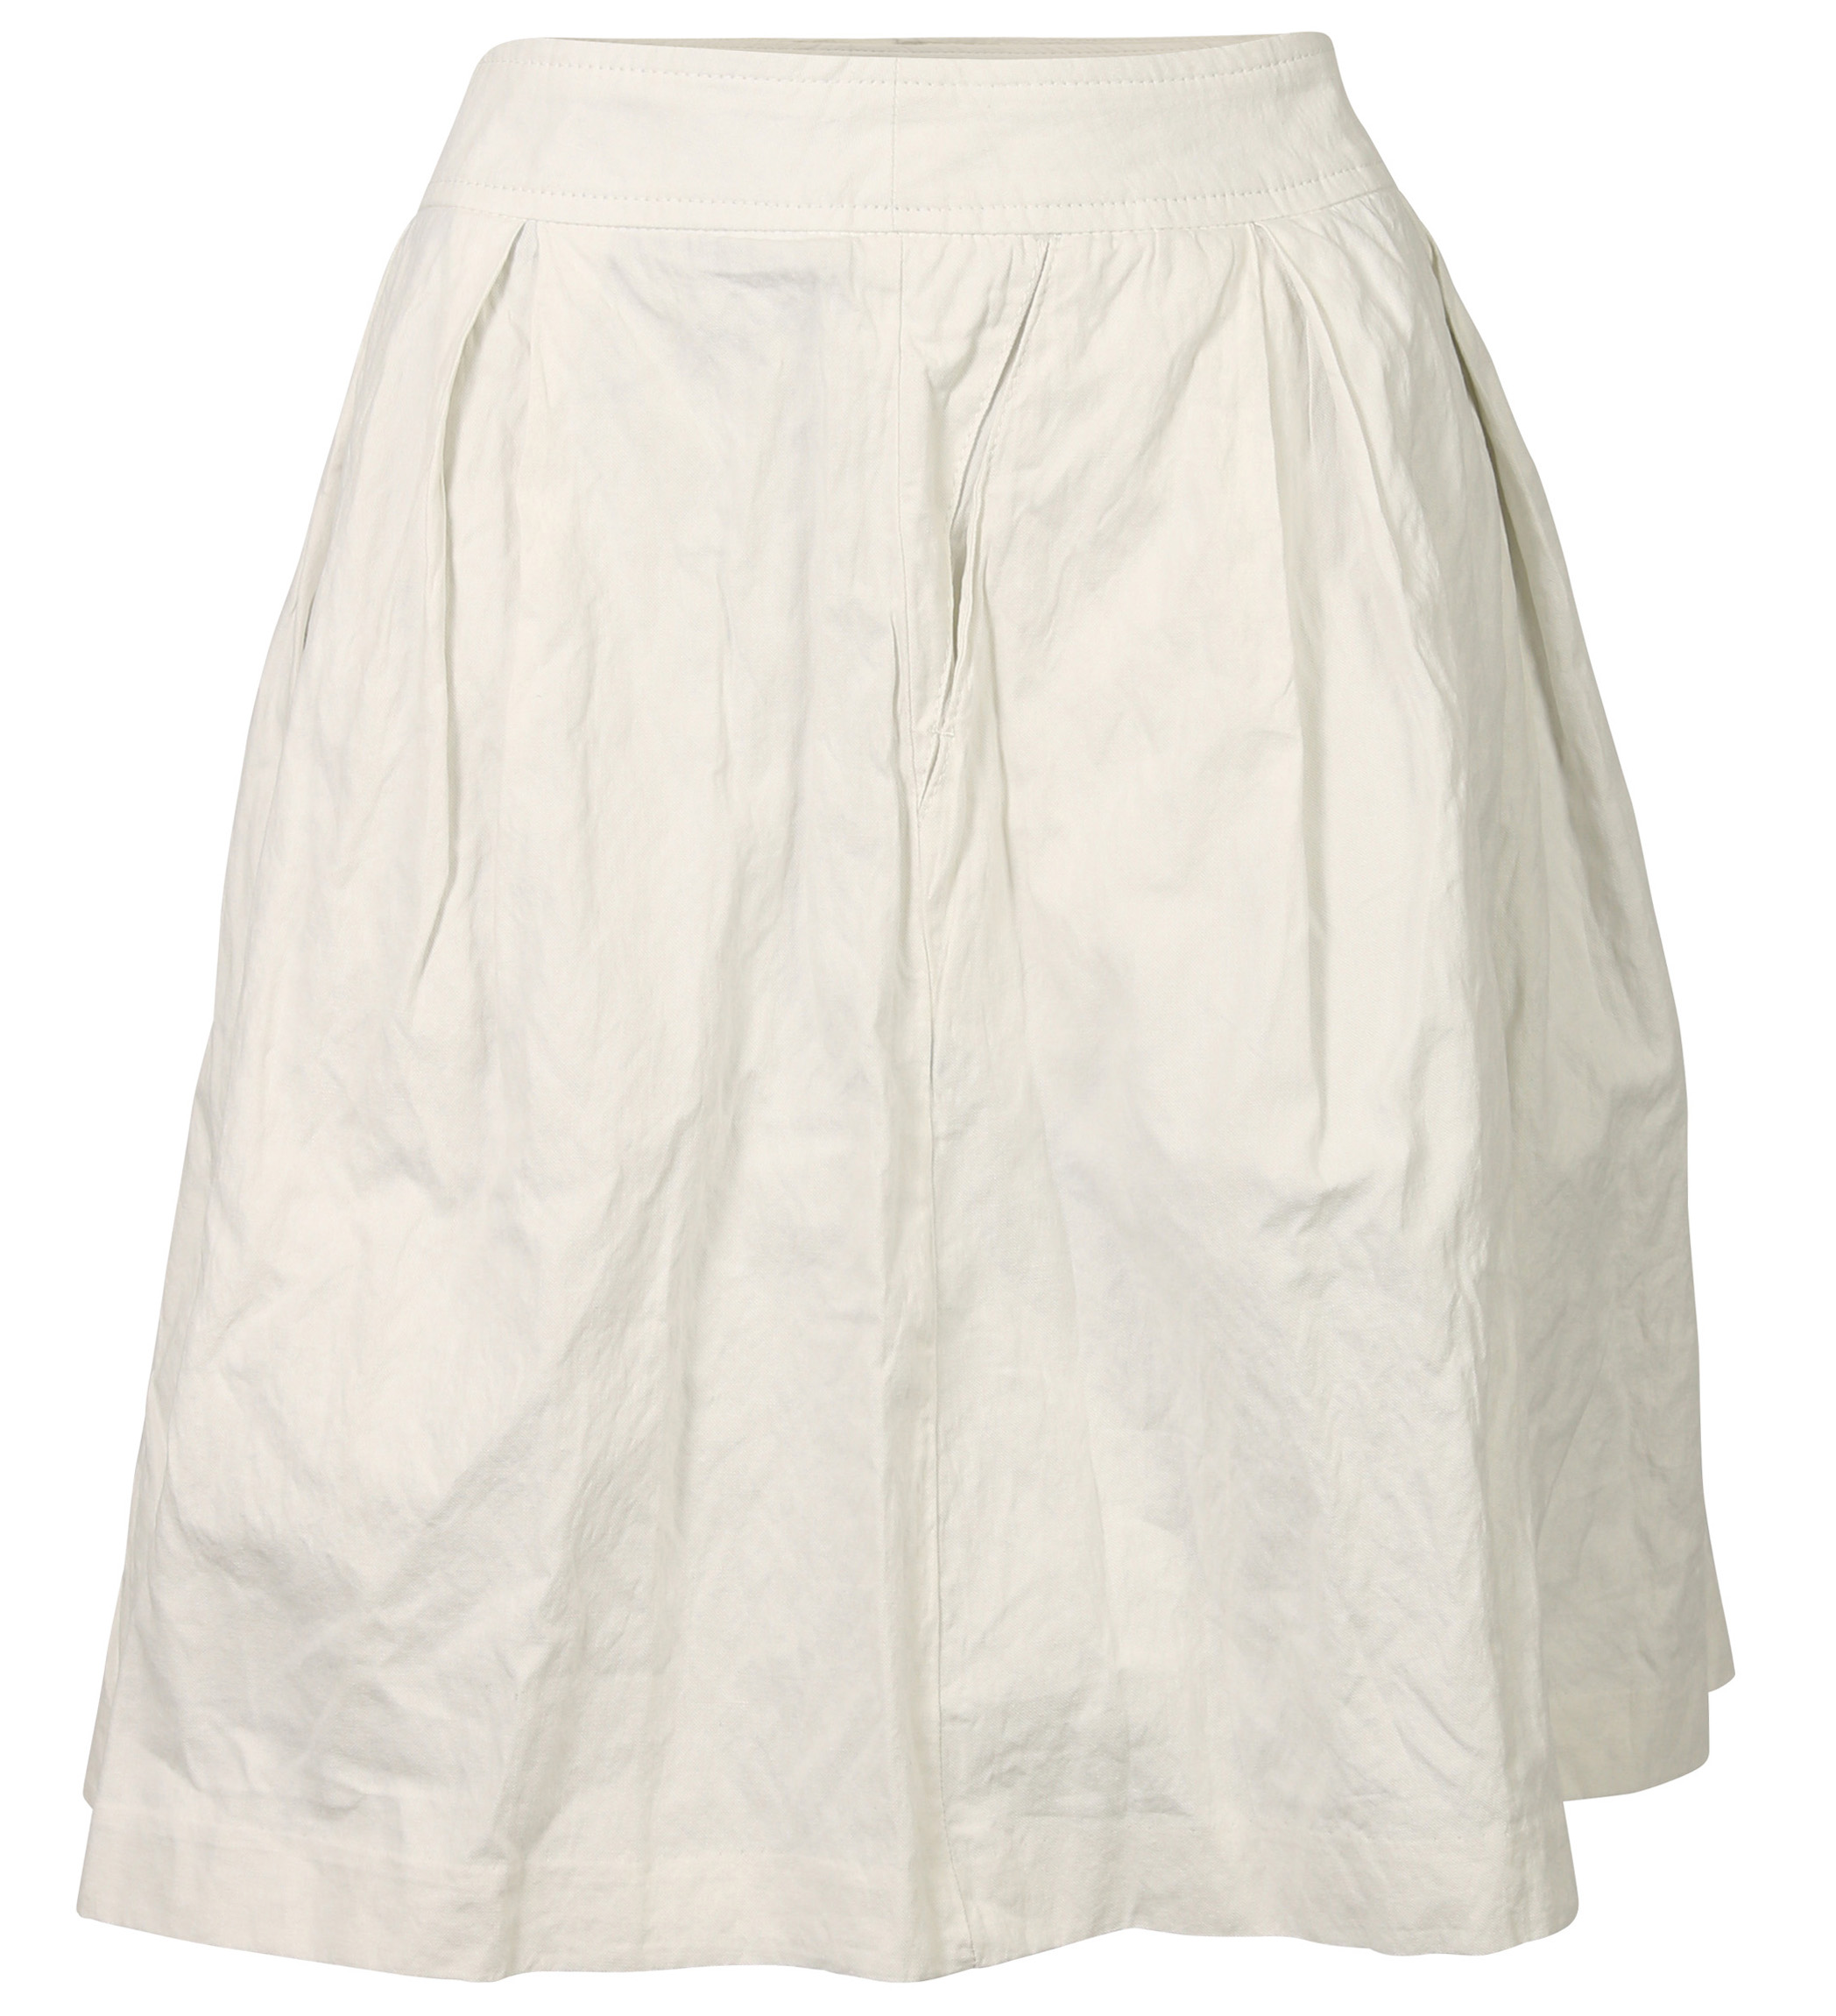 Hannes Roether Skirt Offwhite XS